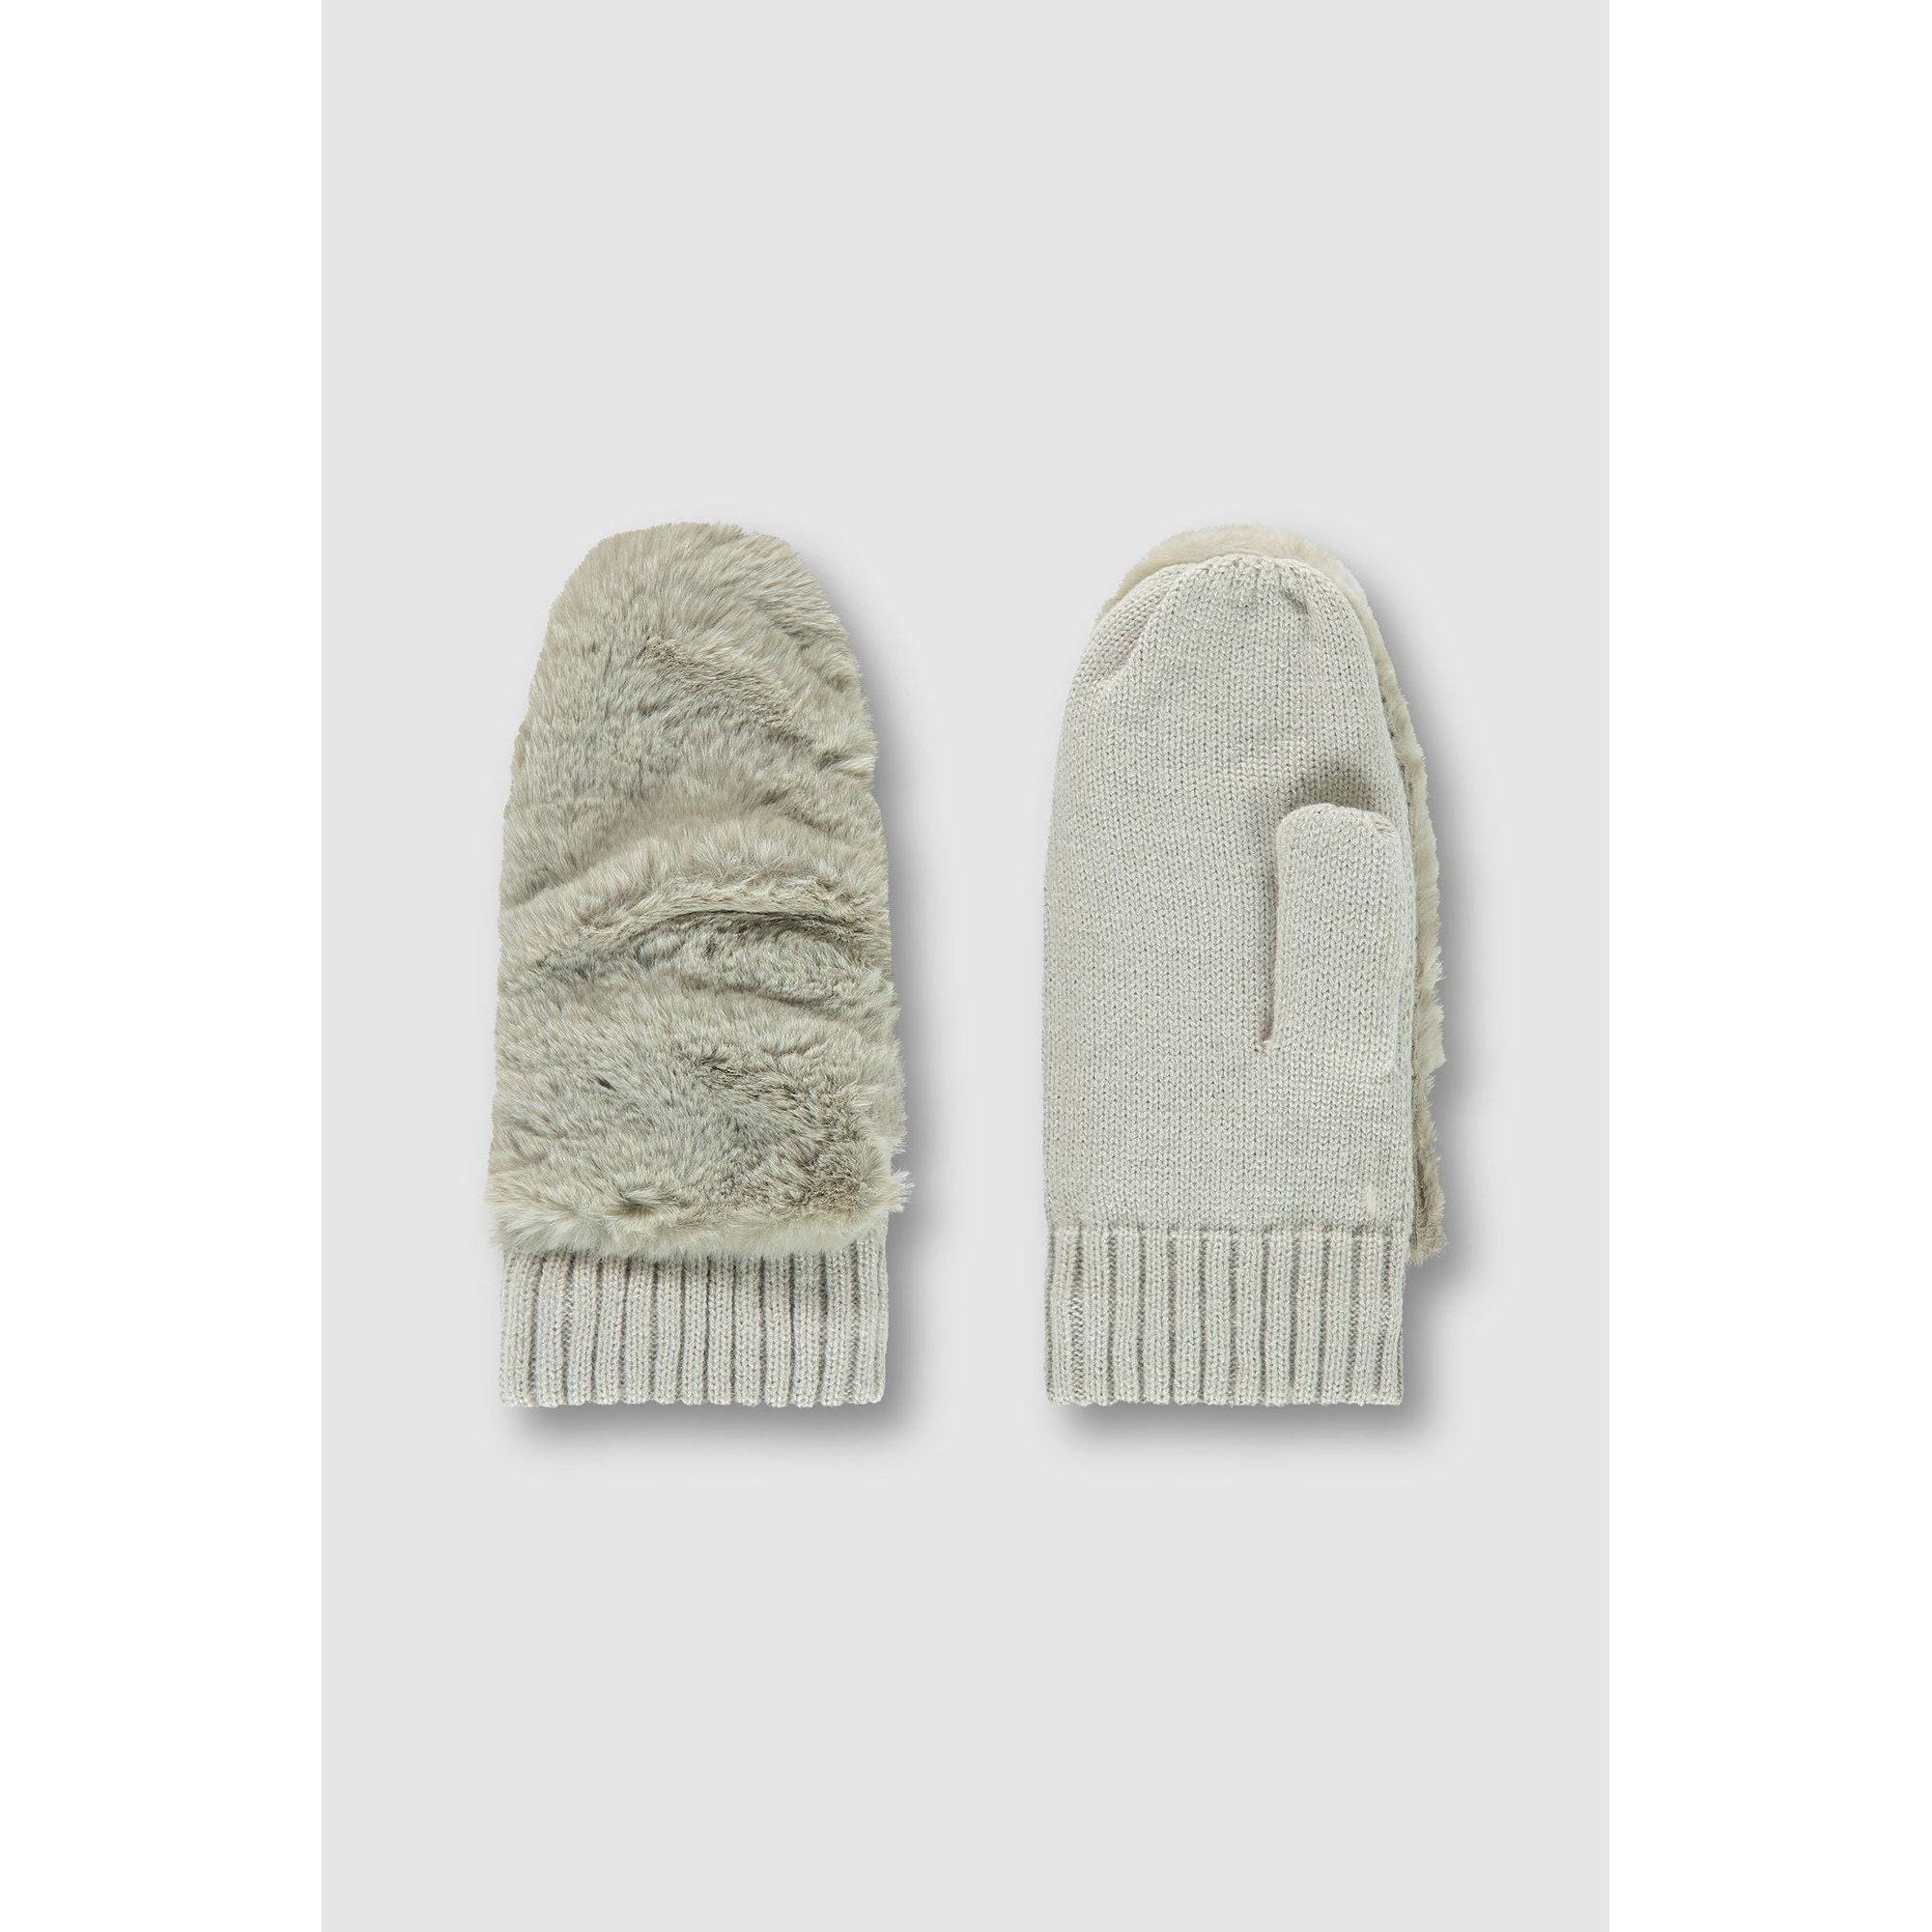 Rino & Pelle - Oxo Mittens in Sage